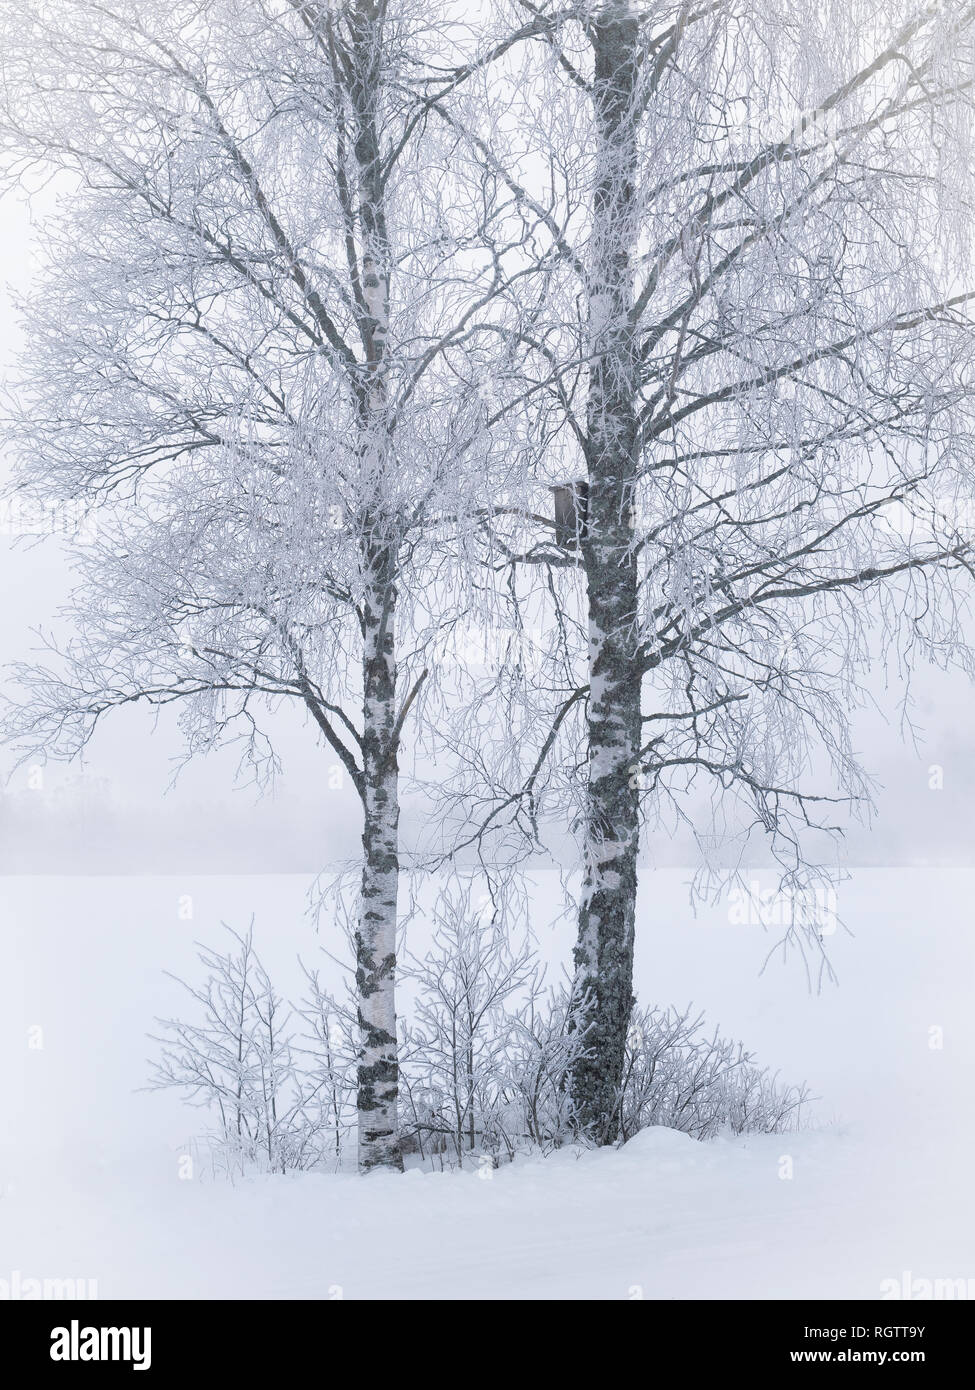 Misty landscape with trees and fog at winter morning in Finland Stock Photo